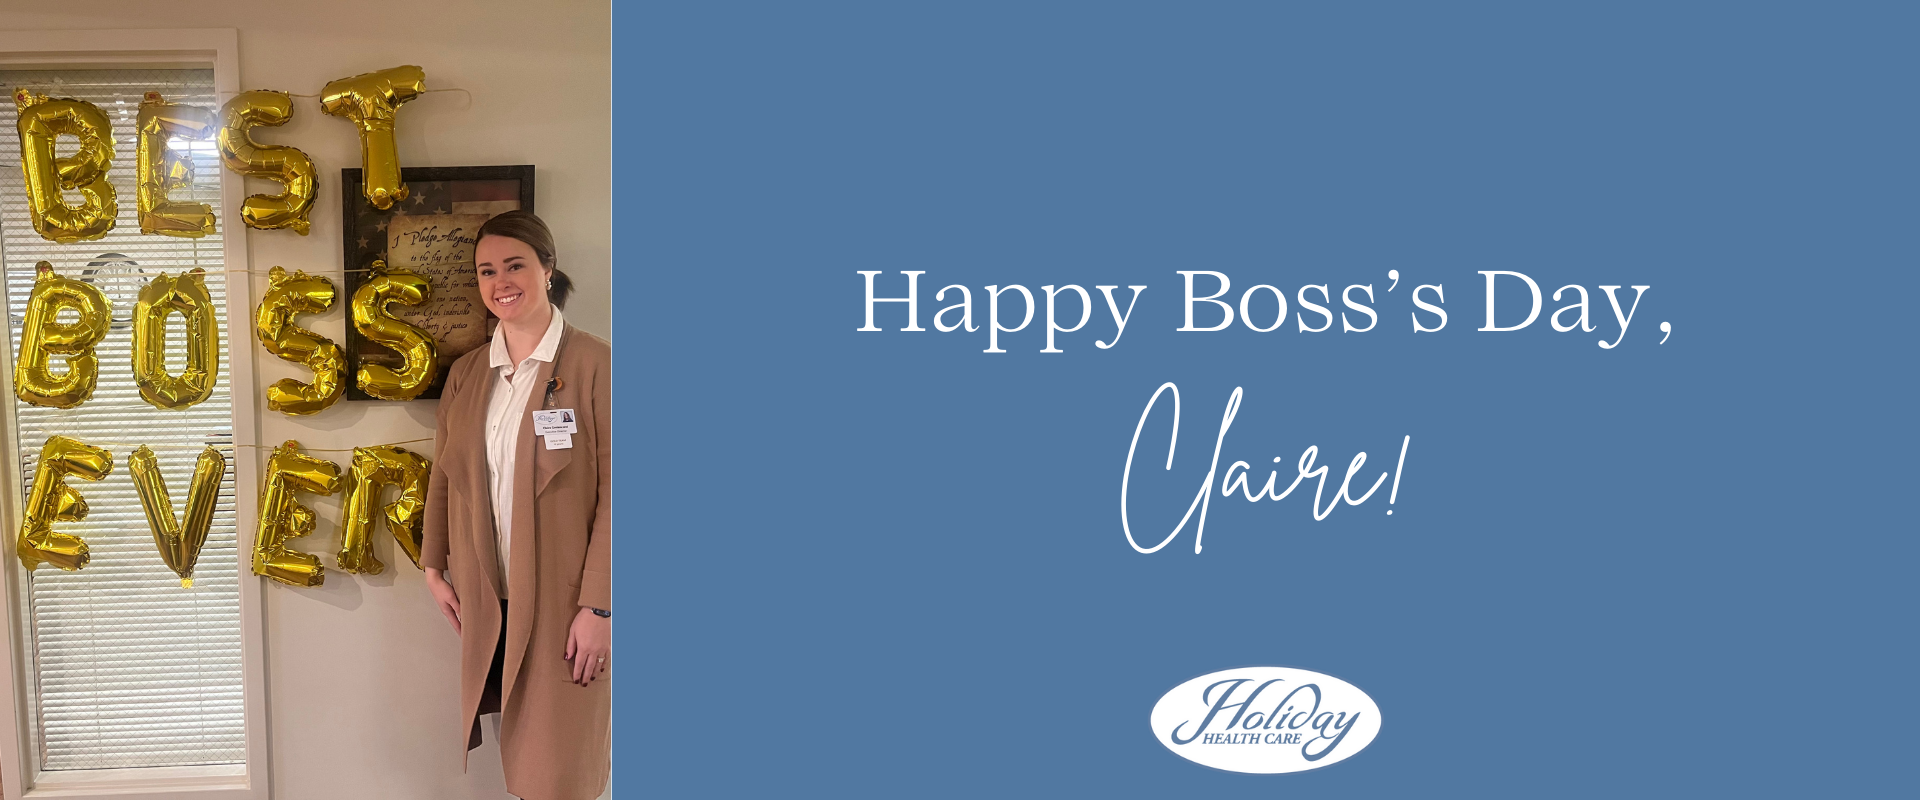 Happy Boss's Day Claire